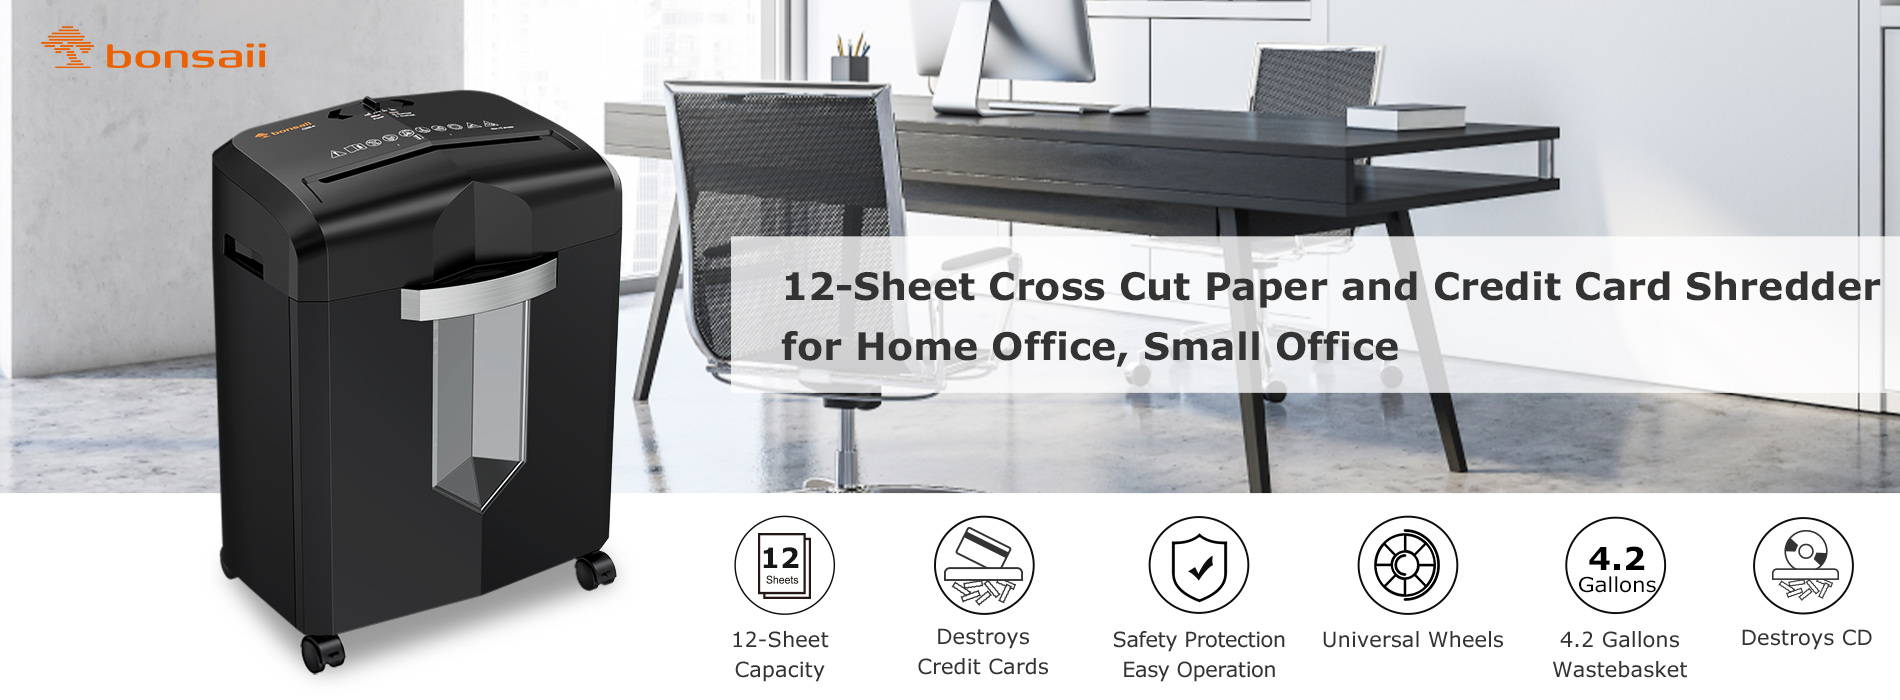 12-Sheet Cross Cut Paper and Credit Card Shredder for Home Office, Small Office （C266-A）